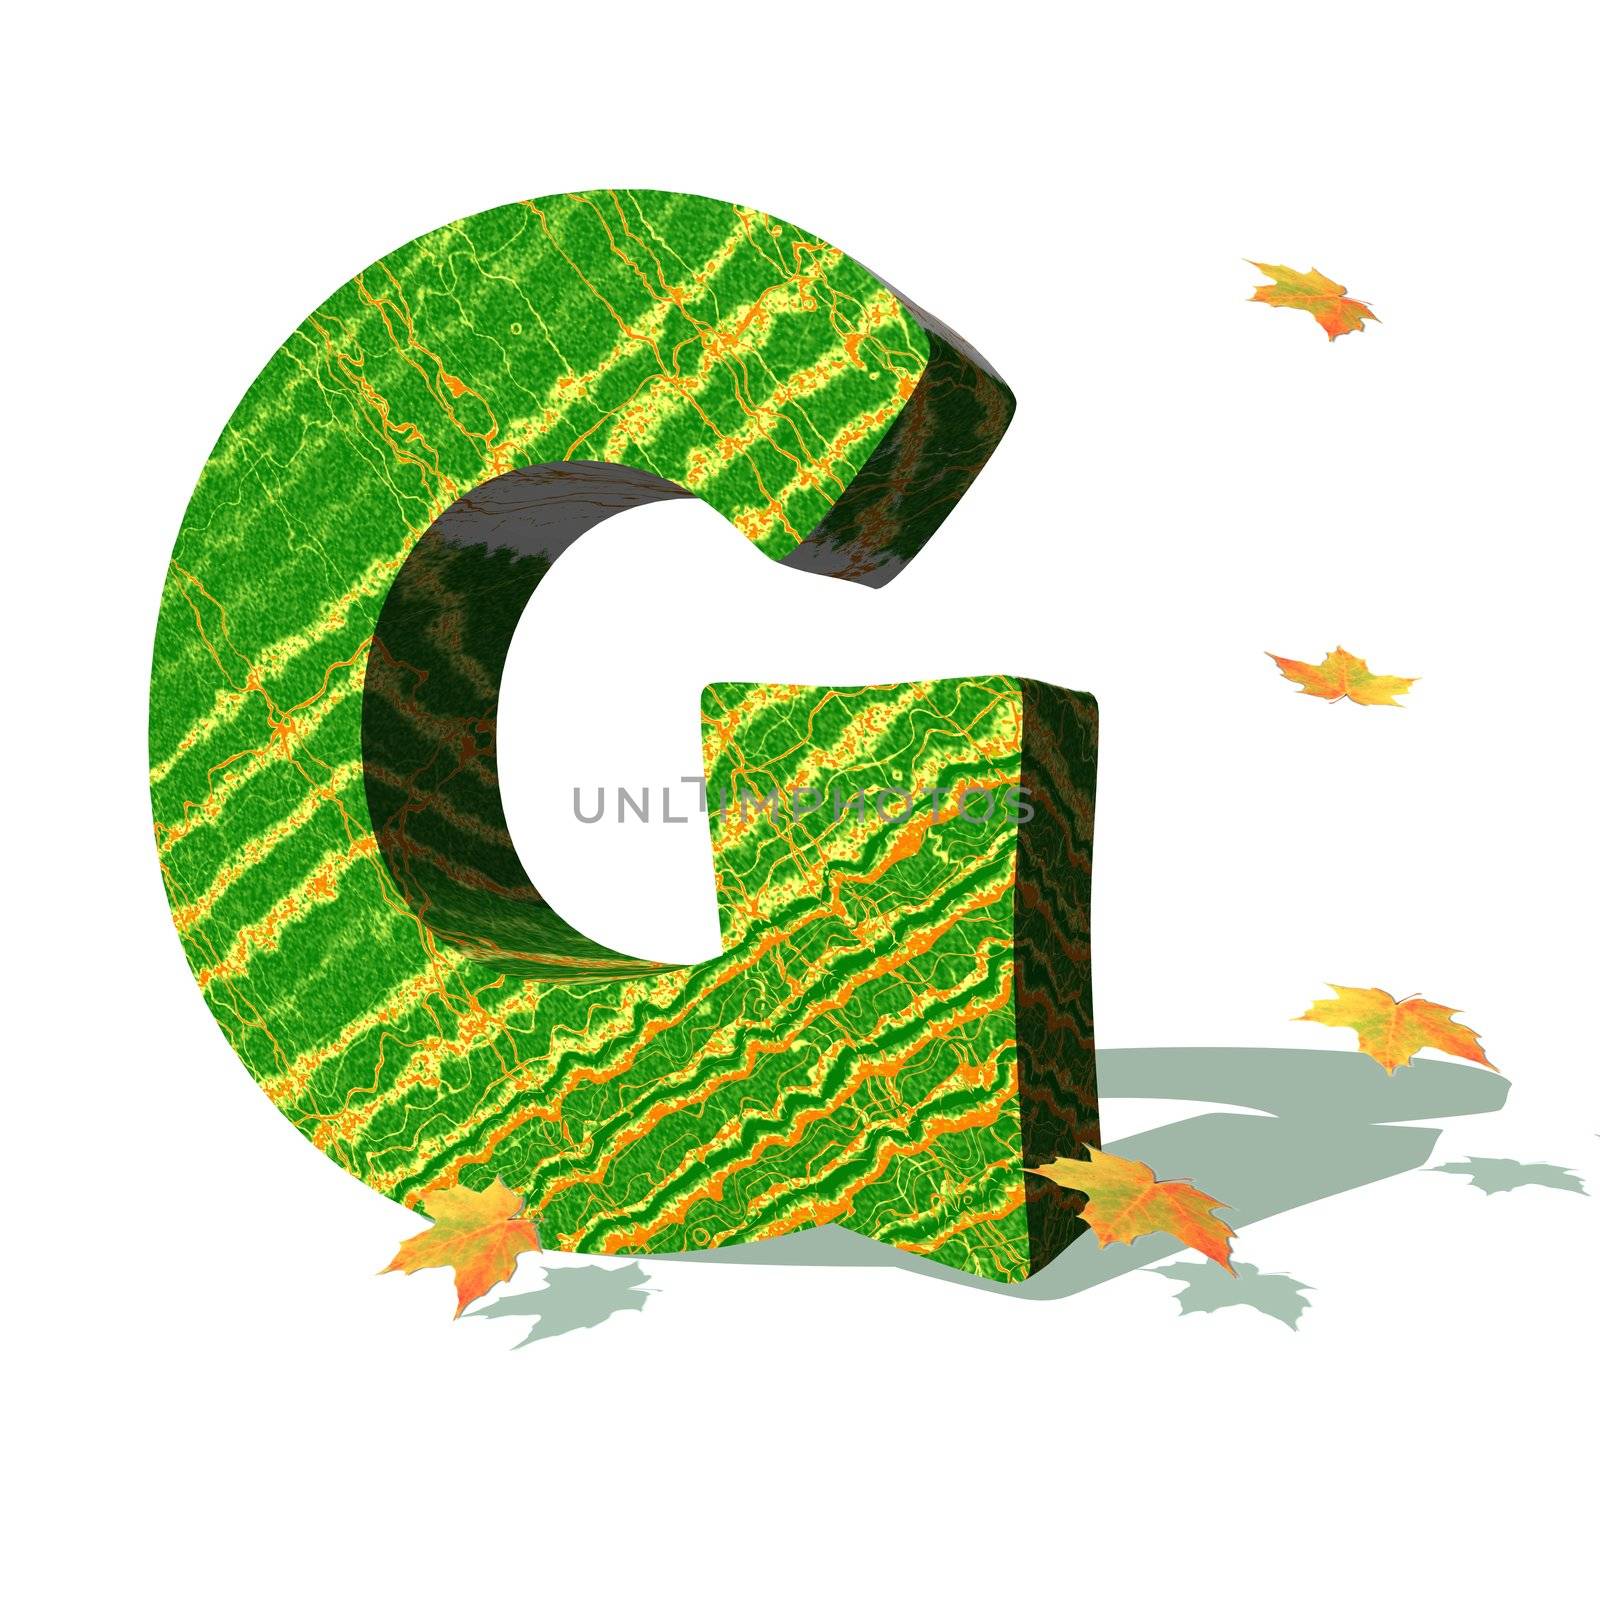 Green ecological G capital letter surrounded by few autumn falling leaves in a white background with shadows